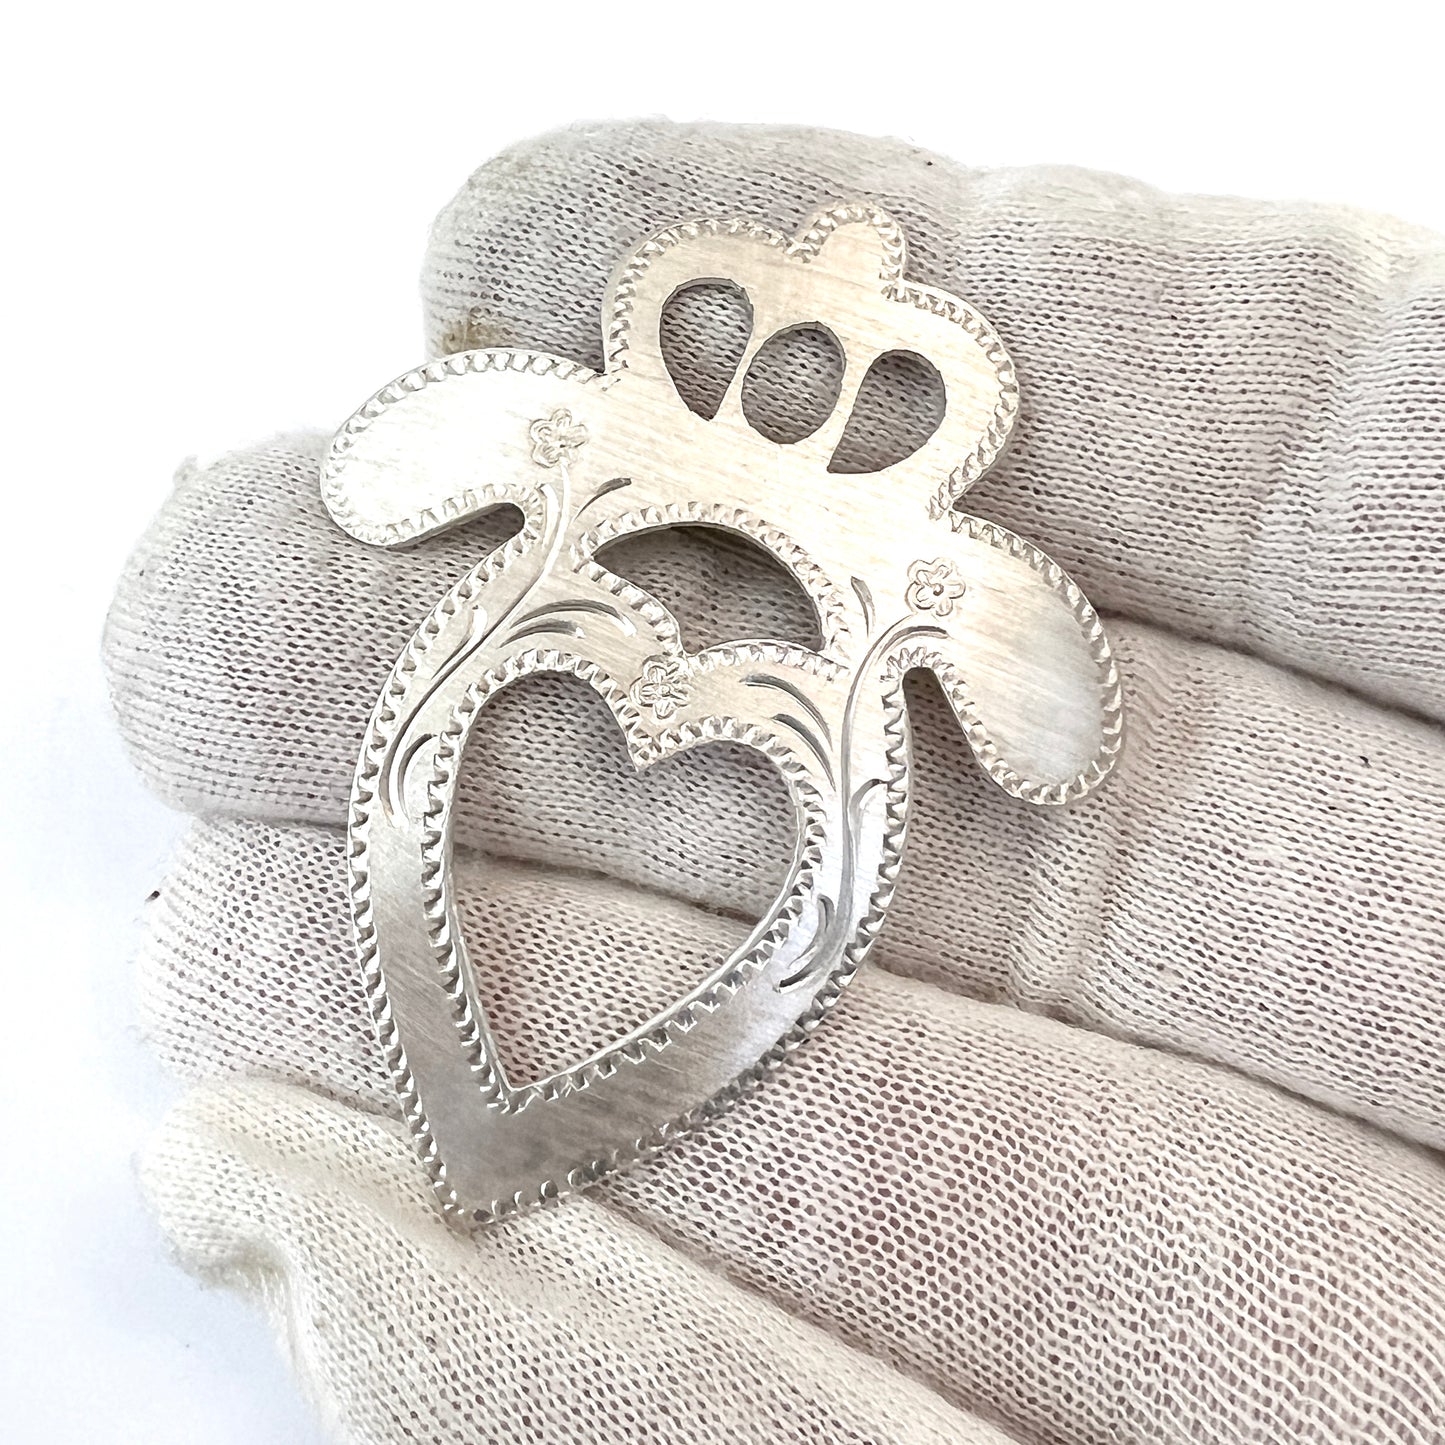 Christer Tonnby, Sweden 1987. Traditional Crowned Heart Brooch in Sterling Silver.